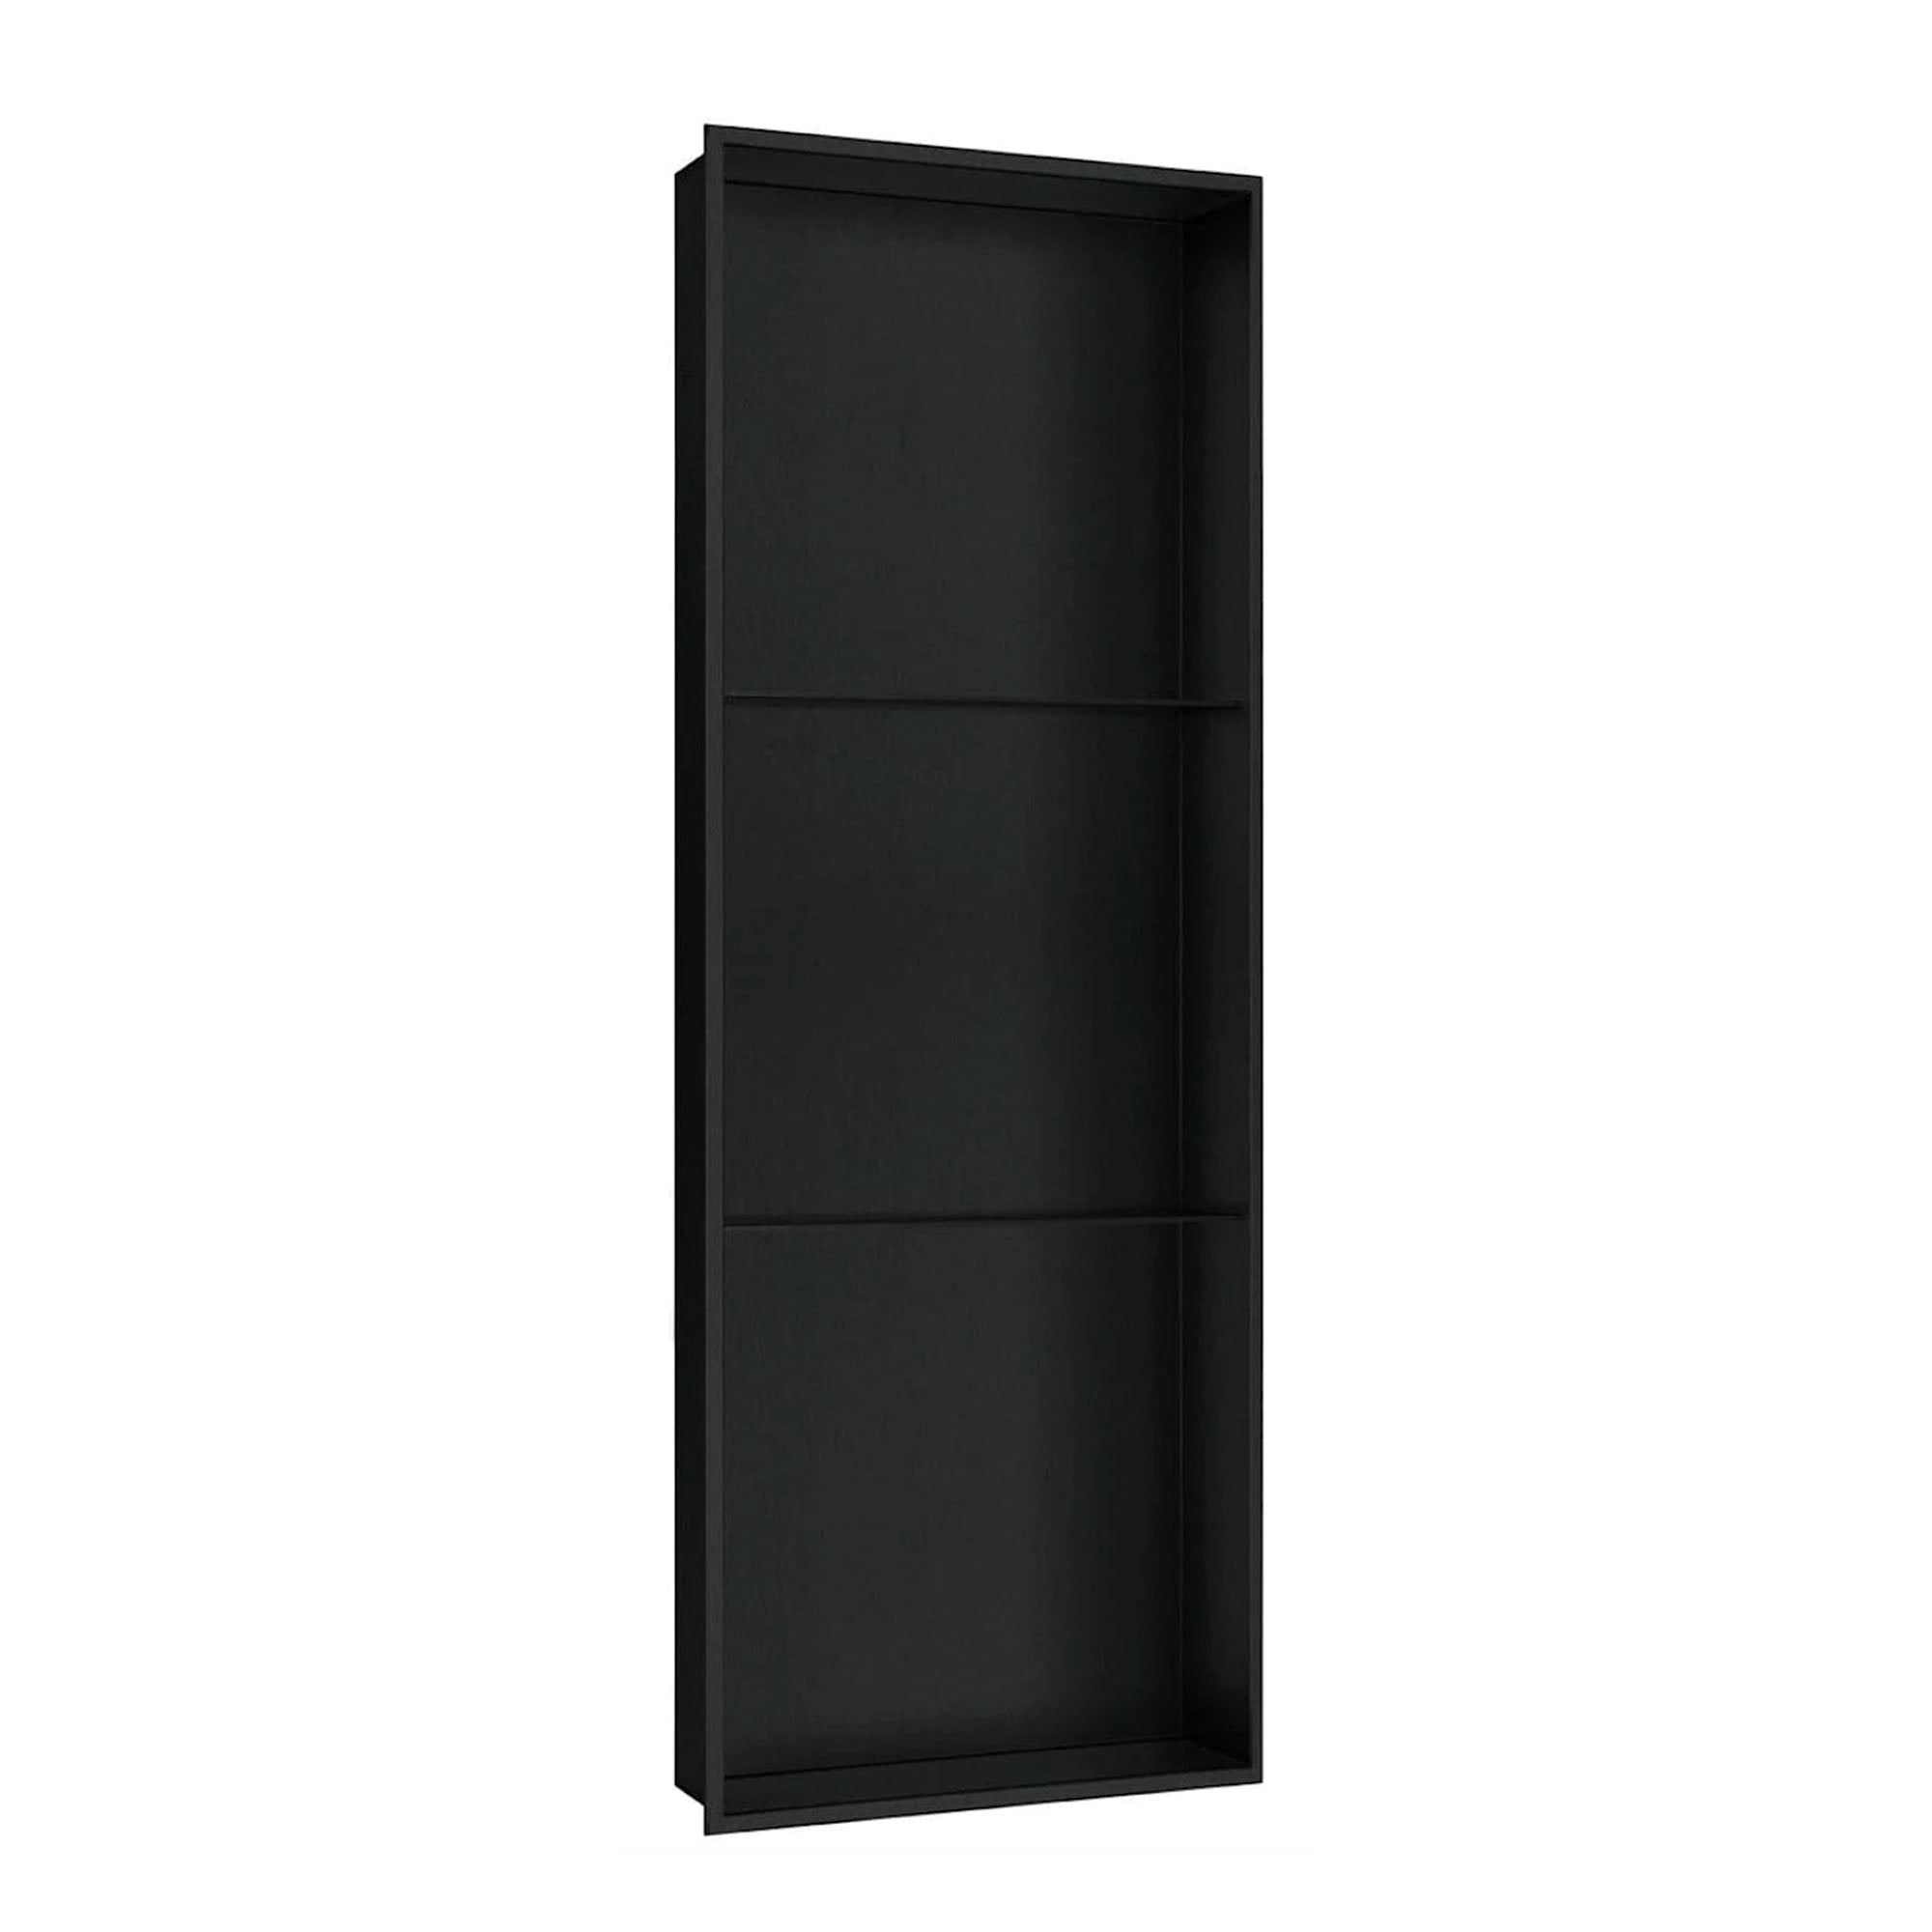 SHOWER WALL NICHE - 12 X 36" BLACK (WITH SHELVES)